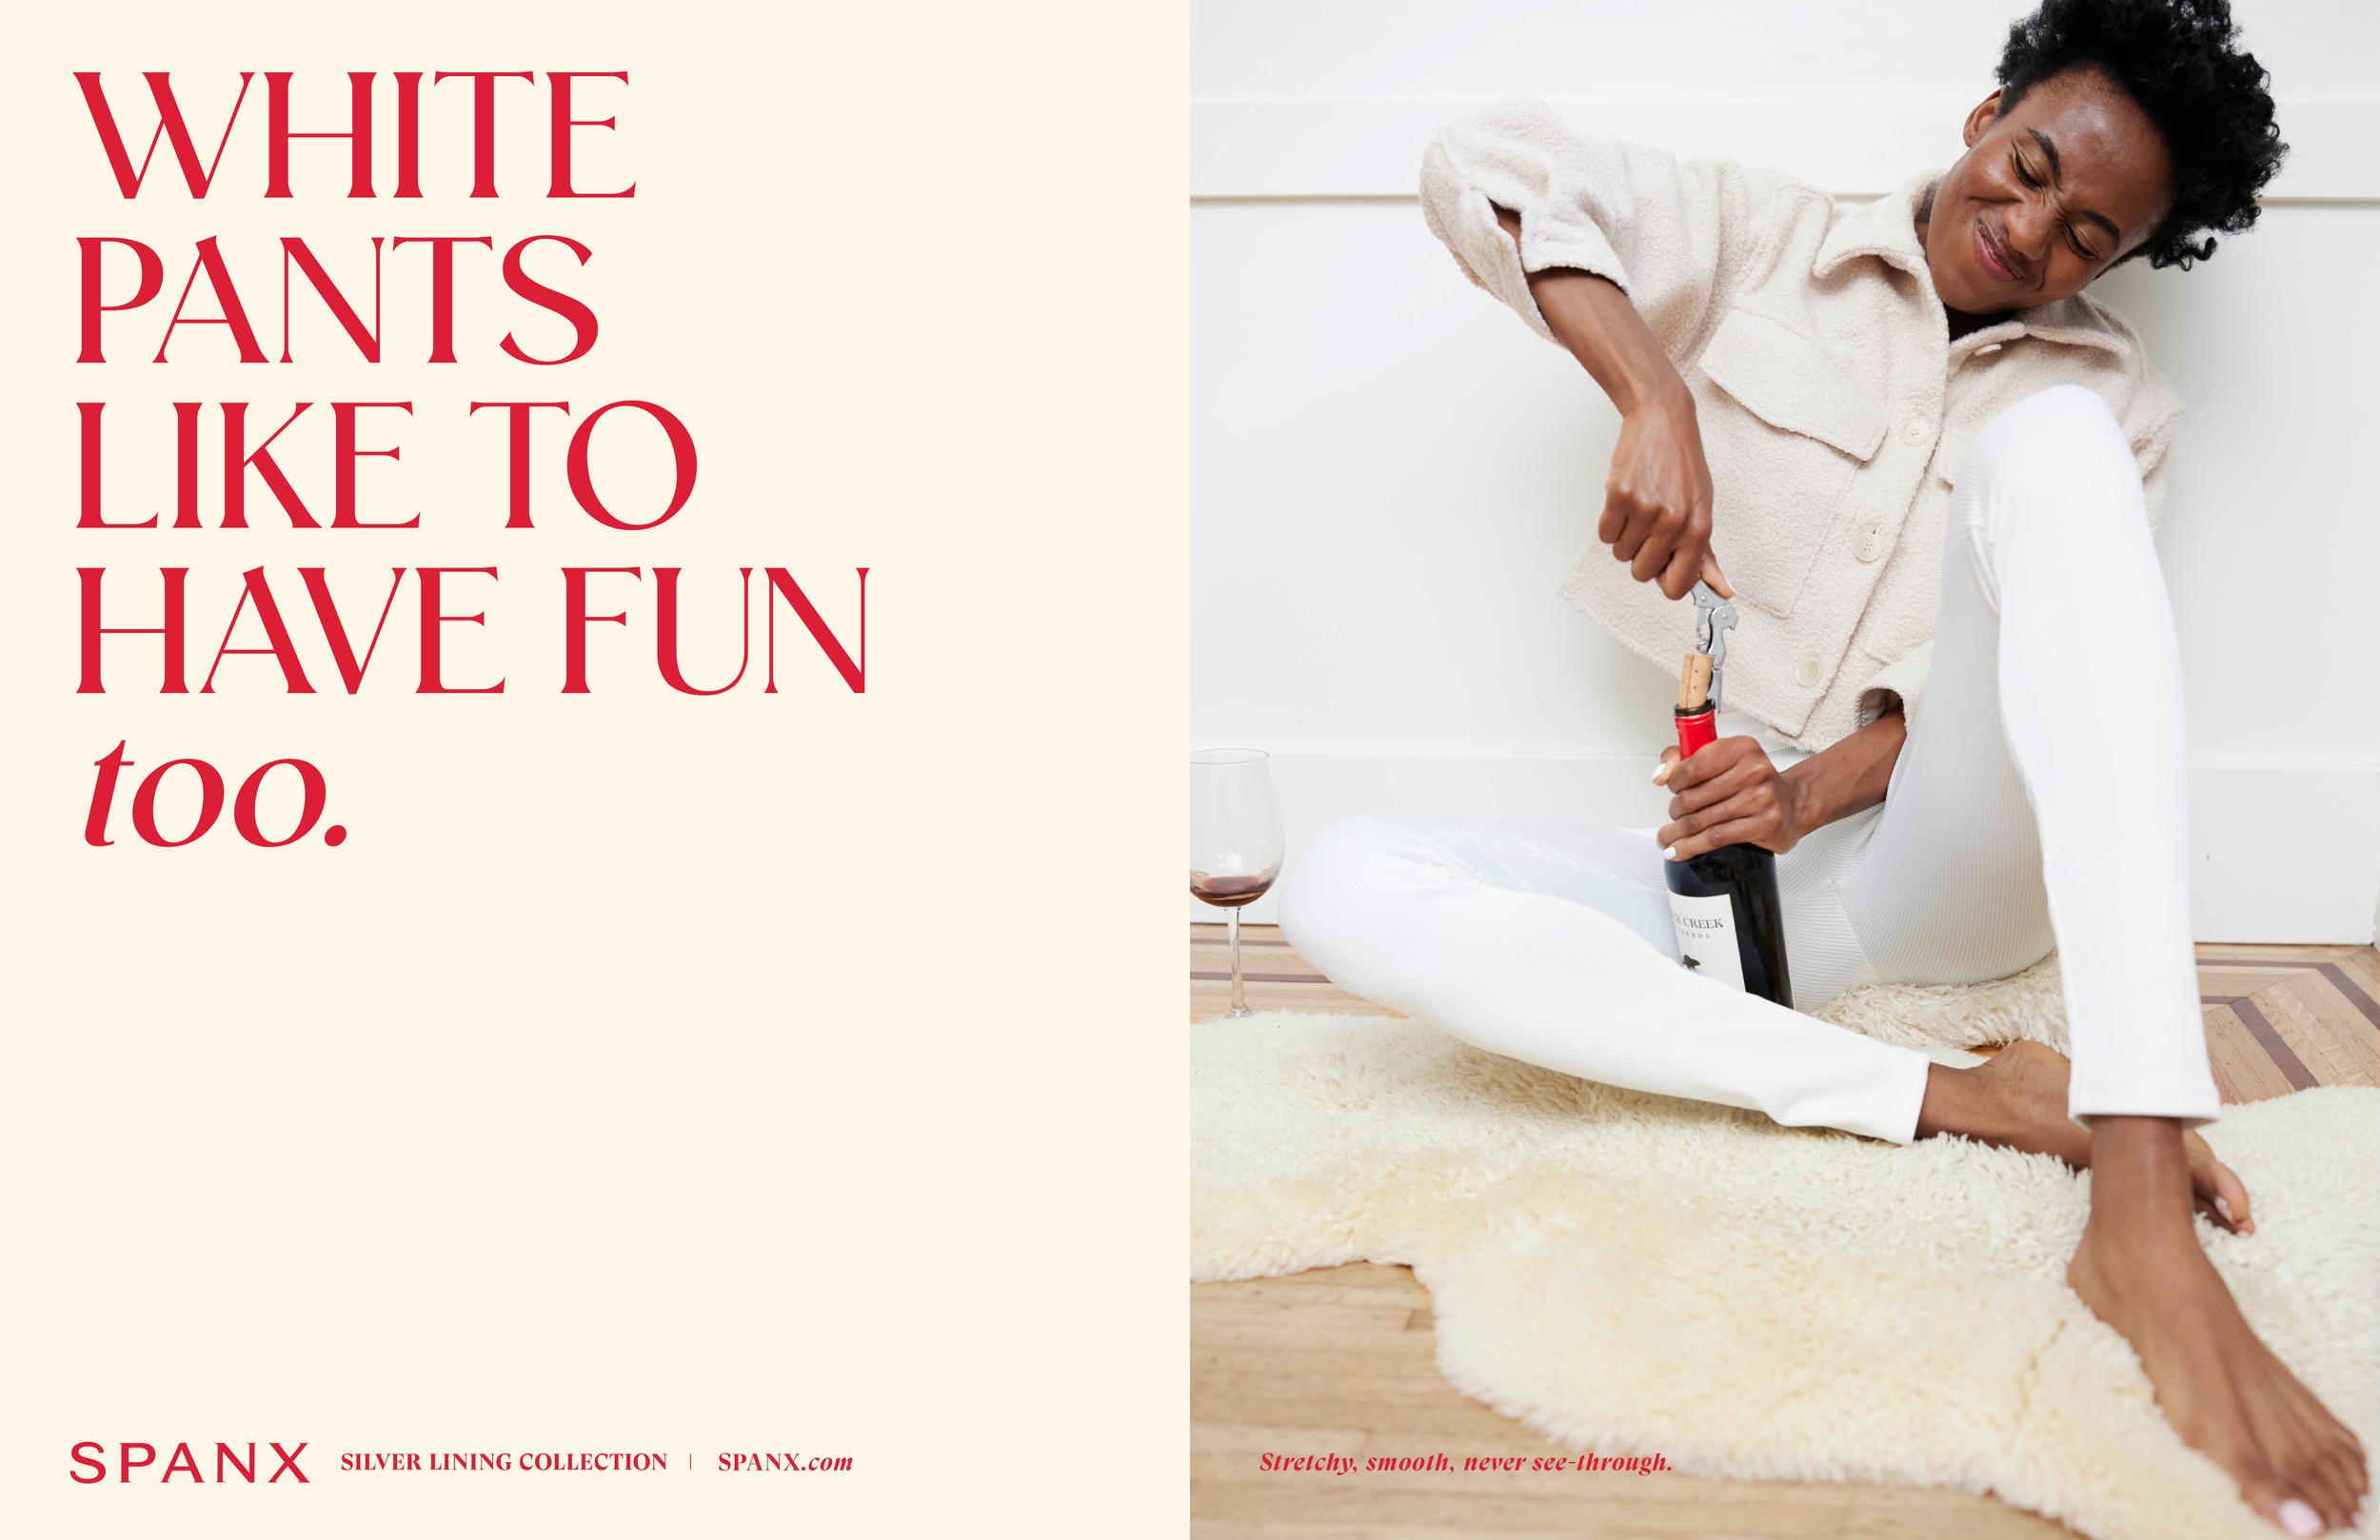 Art direction, photography, and design for Spanx white pants campaign —  EMILY DEVERY